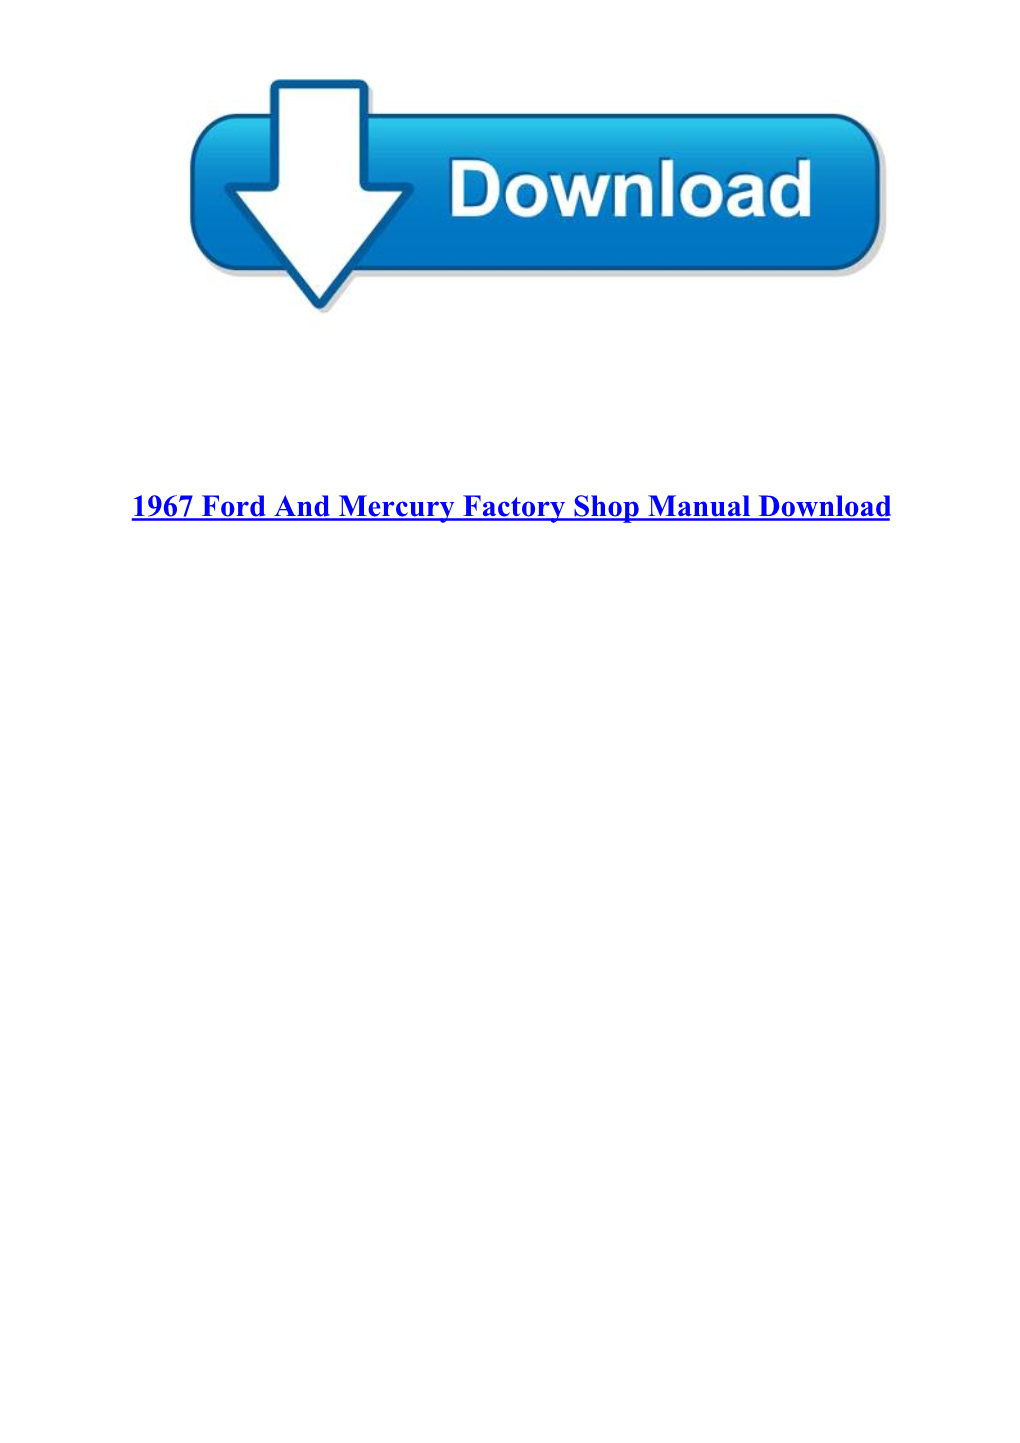 1967 Ford and Mercury Factory Shop Manual Download 1967 Ford and Mercury Factory Shop Manual